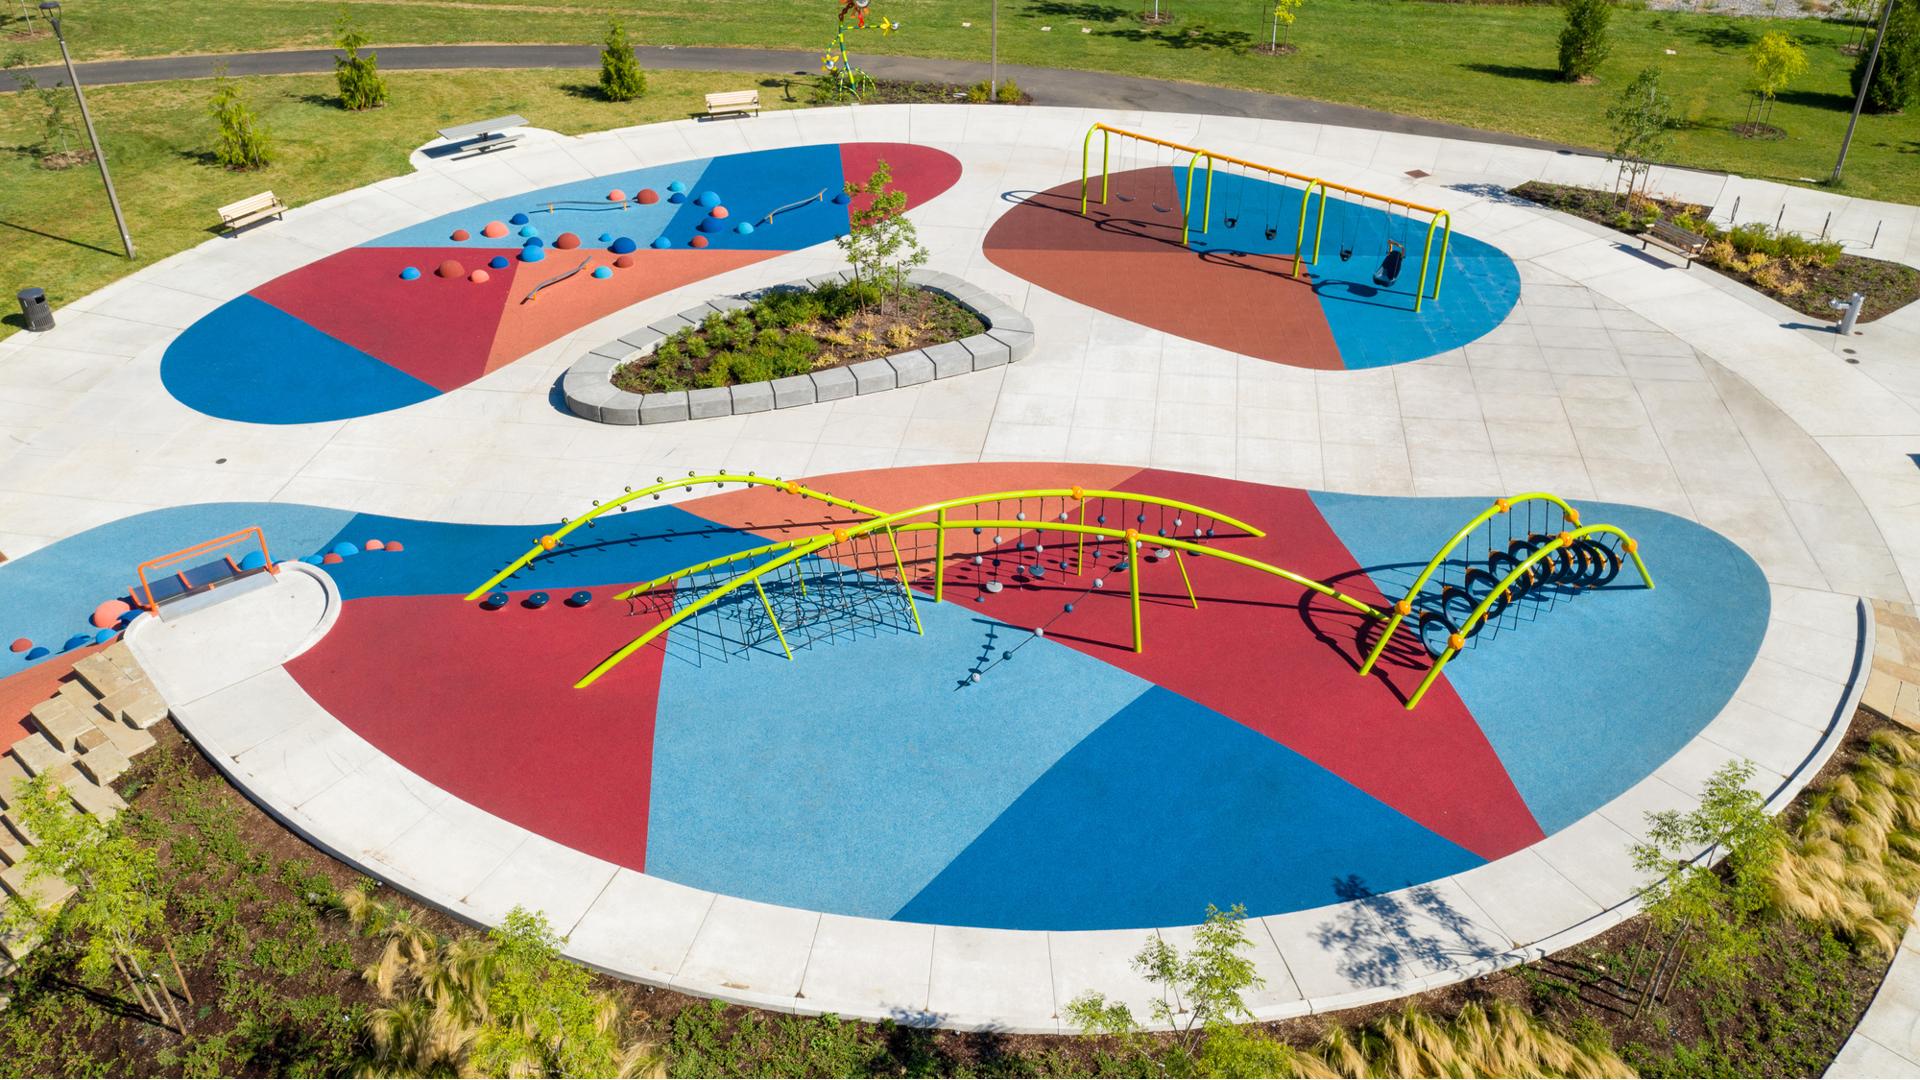 Aerial view of playground space with bright green net climbers with arched shaped posts. Play space also includes climbing pods and swings with blue, red and orange rubber surfacing. 